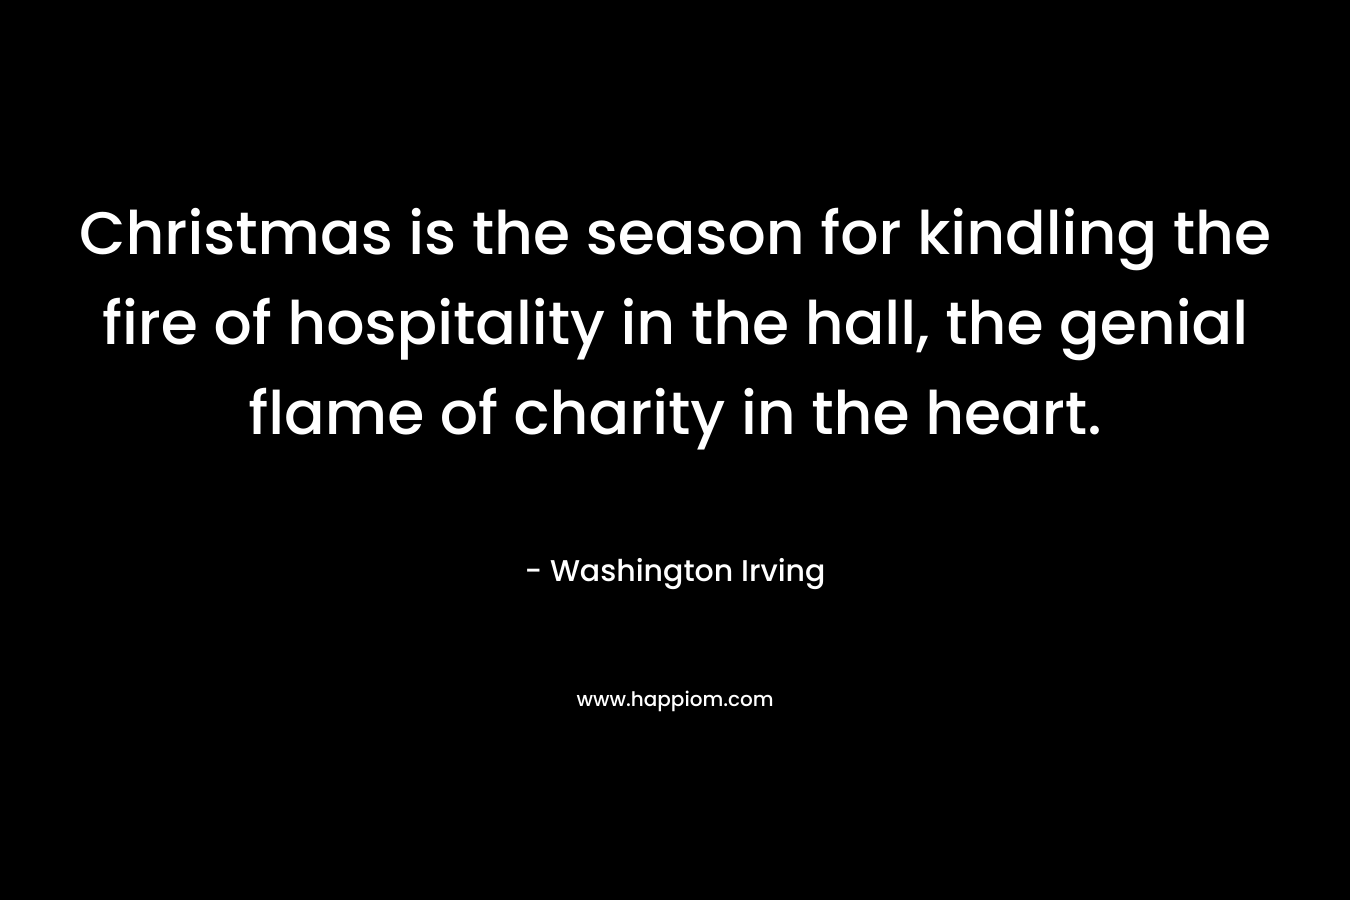 Christmas is the season for kindling the fire of hospitality in the hall, the genial flame of charity in the heart. 